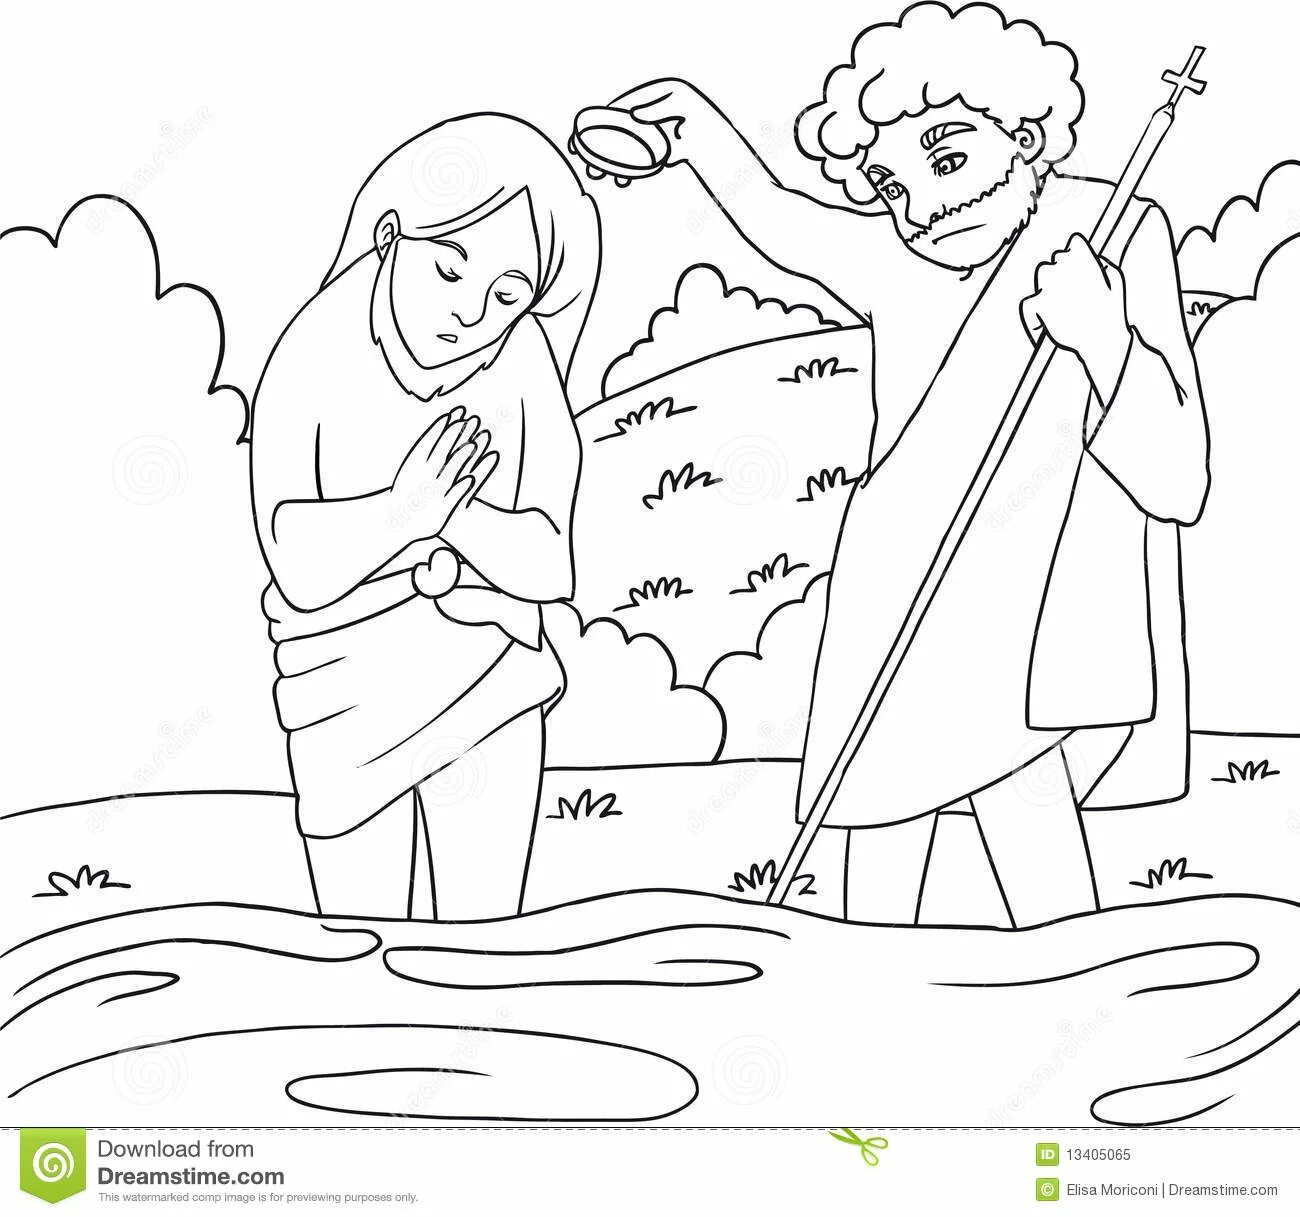 A wonderfully colored baptism coloring page